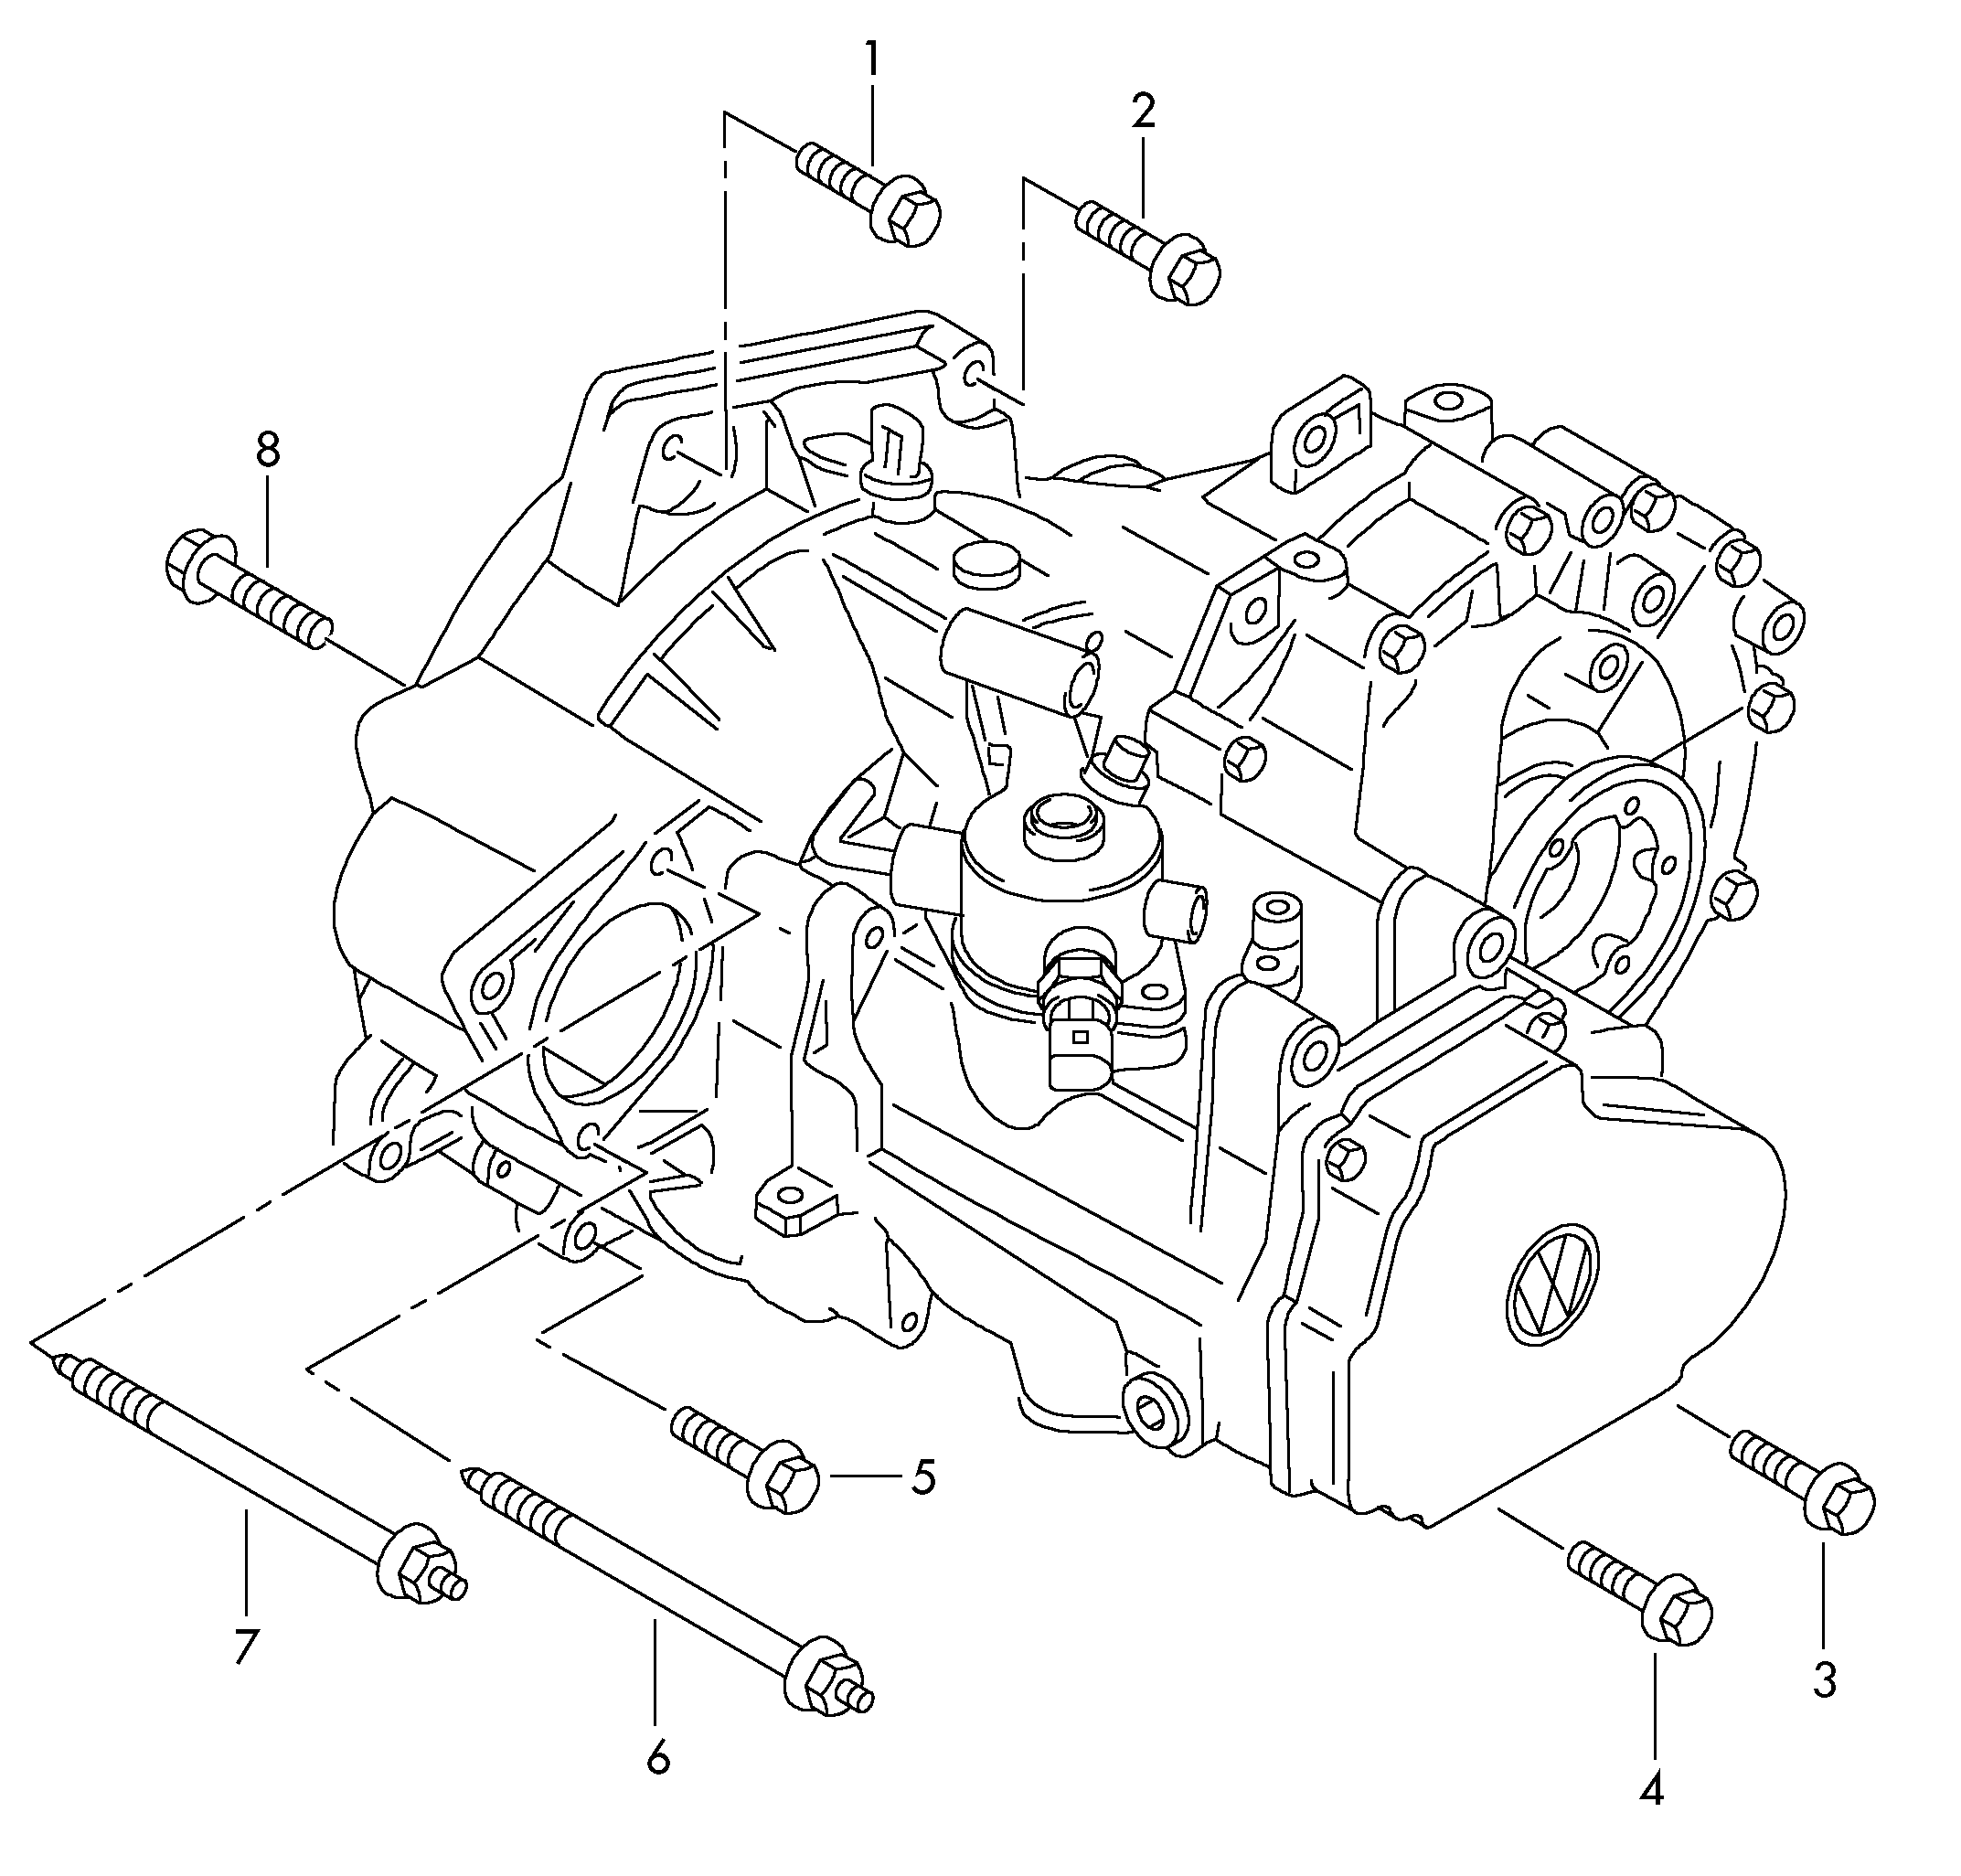 mounting parts for engine and<br>transmissionfor 5 speed manual transmiss.  - Octavia - oct